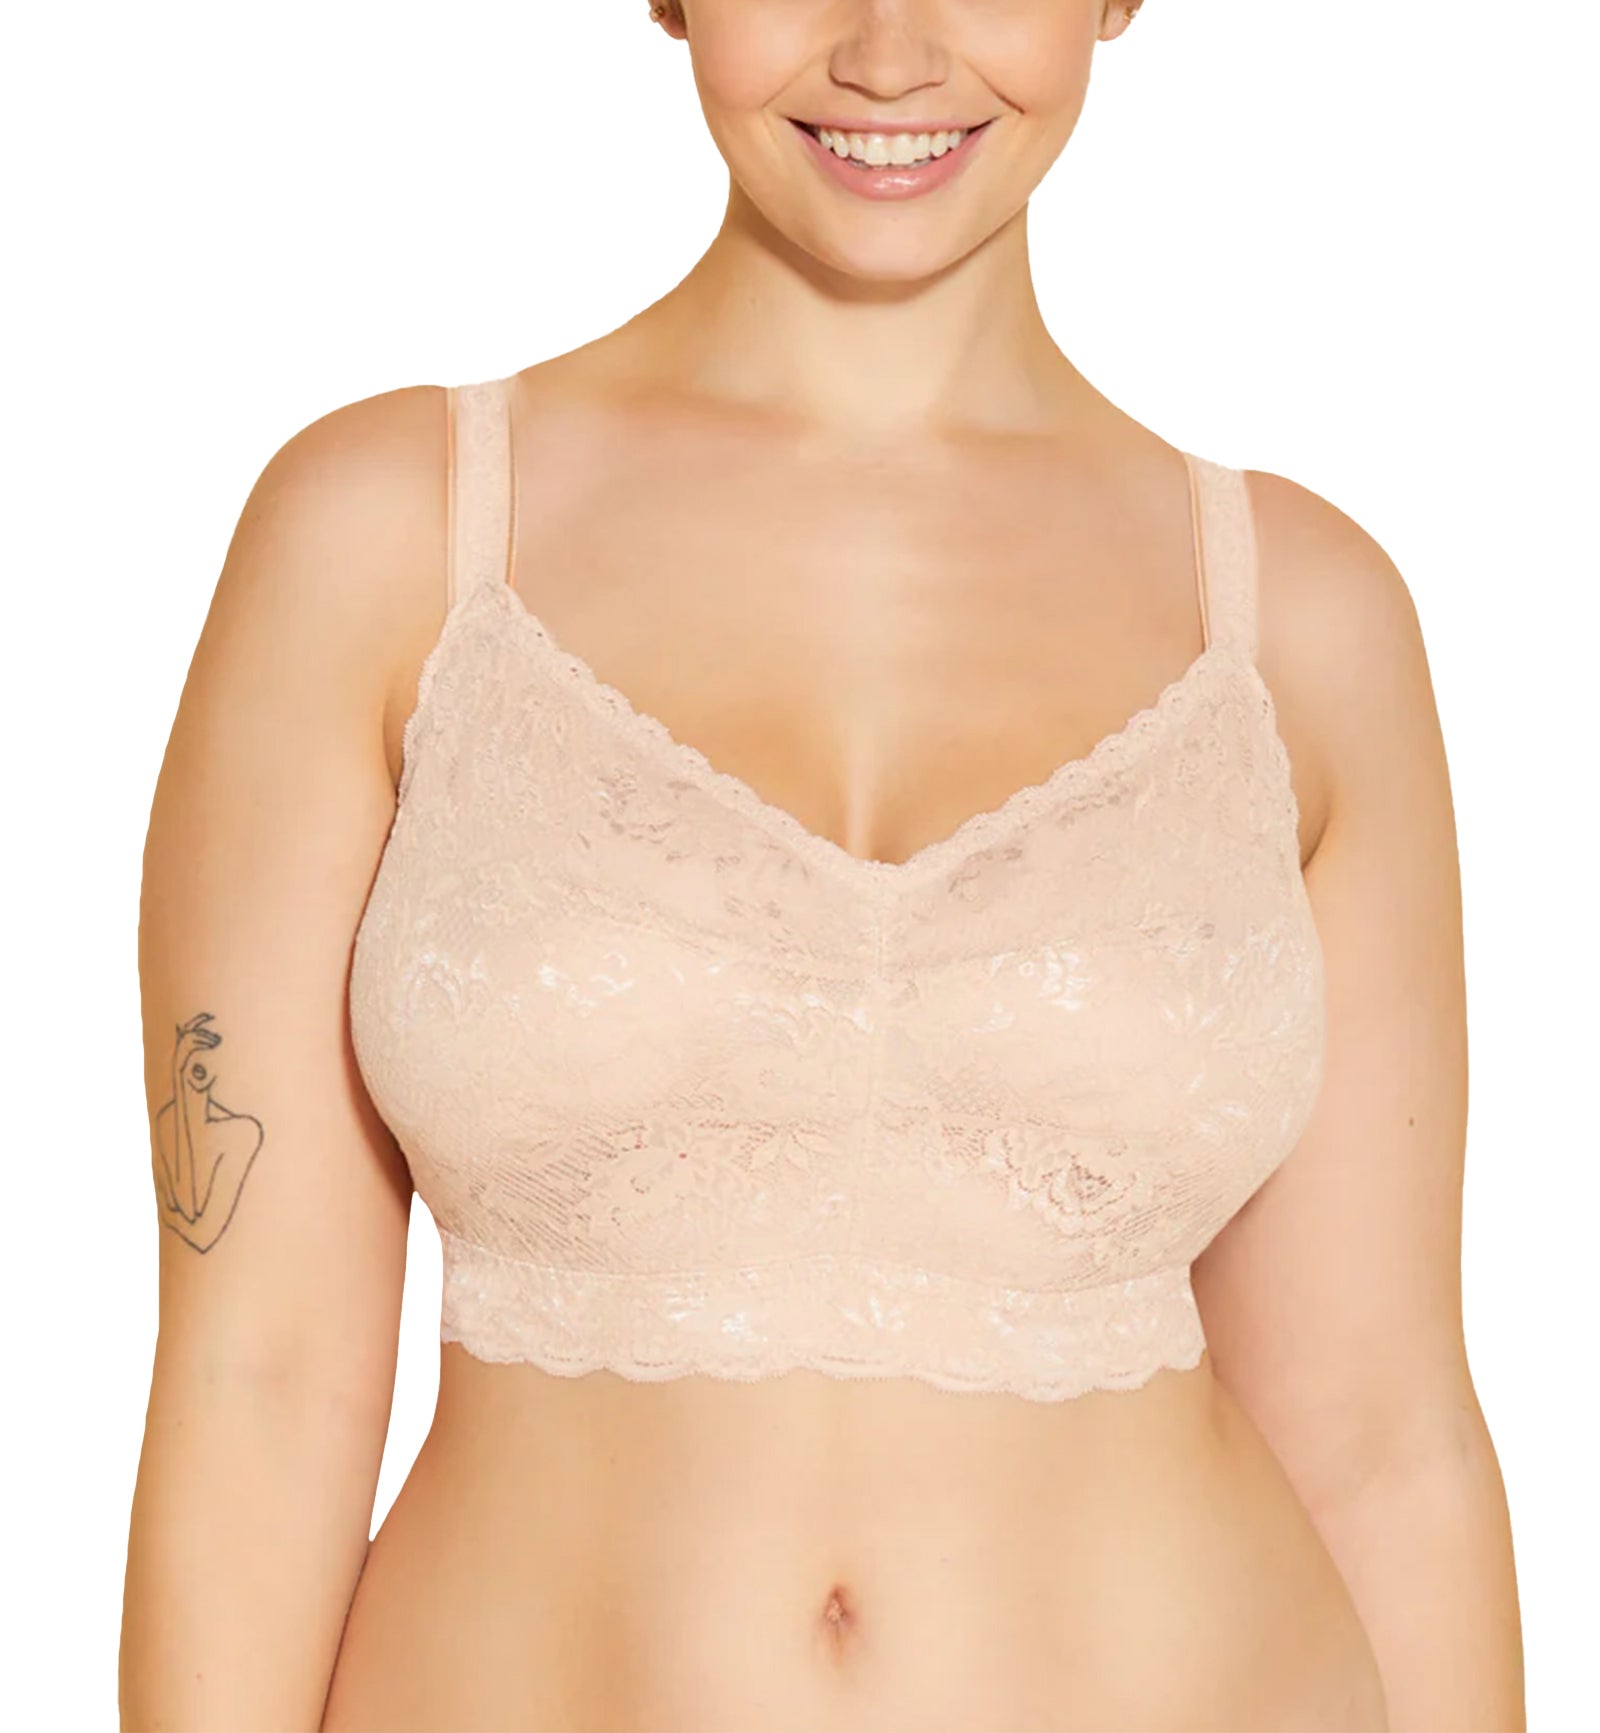 Cosabella NSN SUPER CURVY Sweetie Bralette (NEVER1340),XS,Camel - Camel,XS